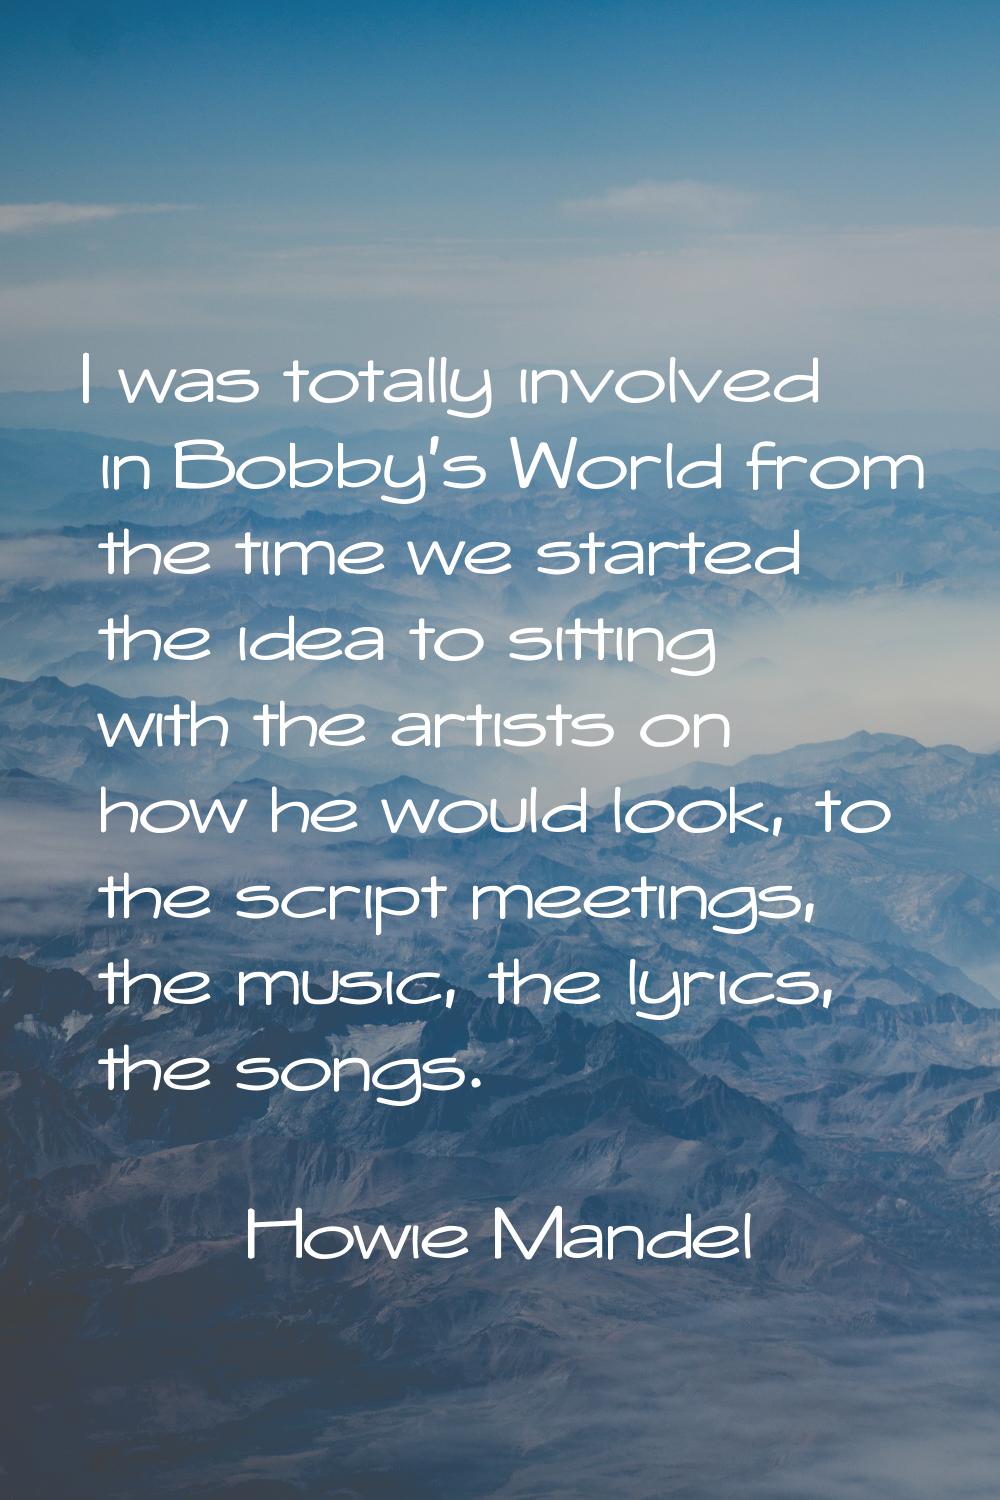 I was totally involved in Bobby's World from the time we started the idea to sitting with the artis